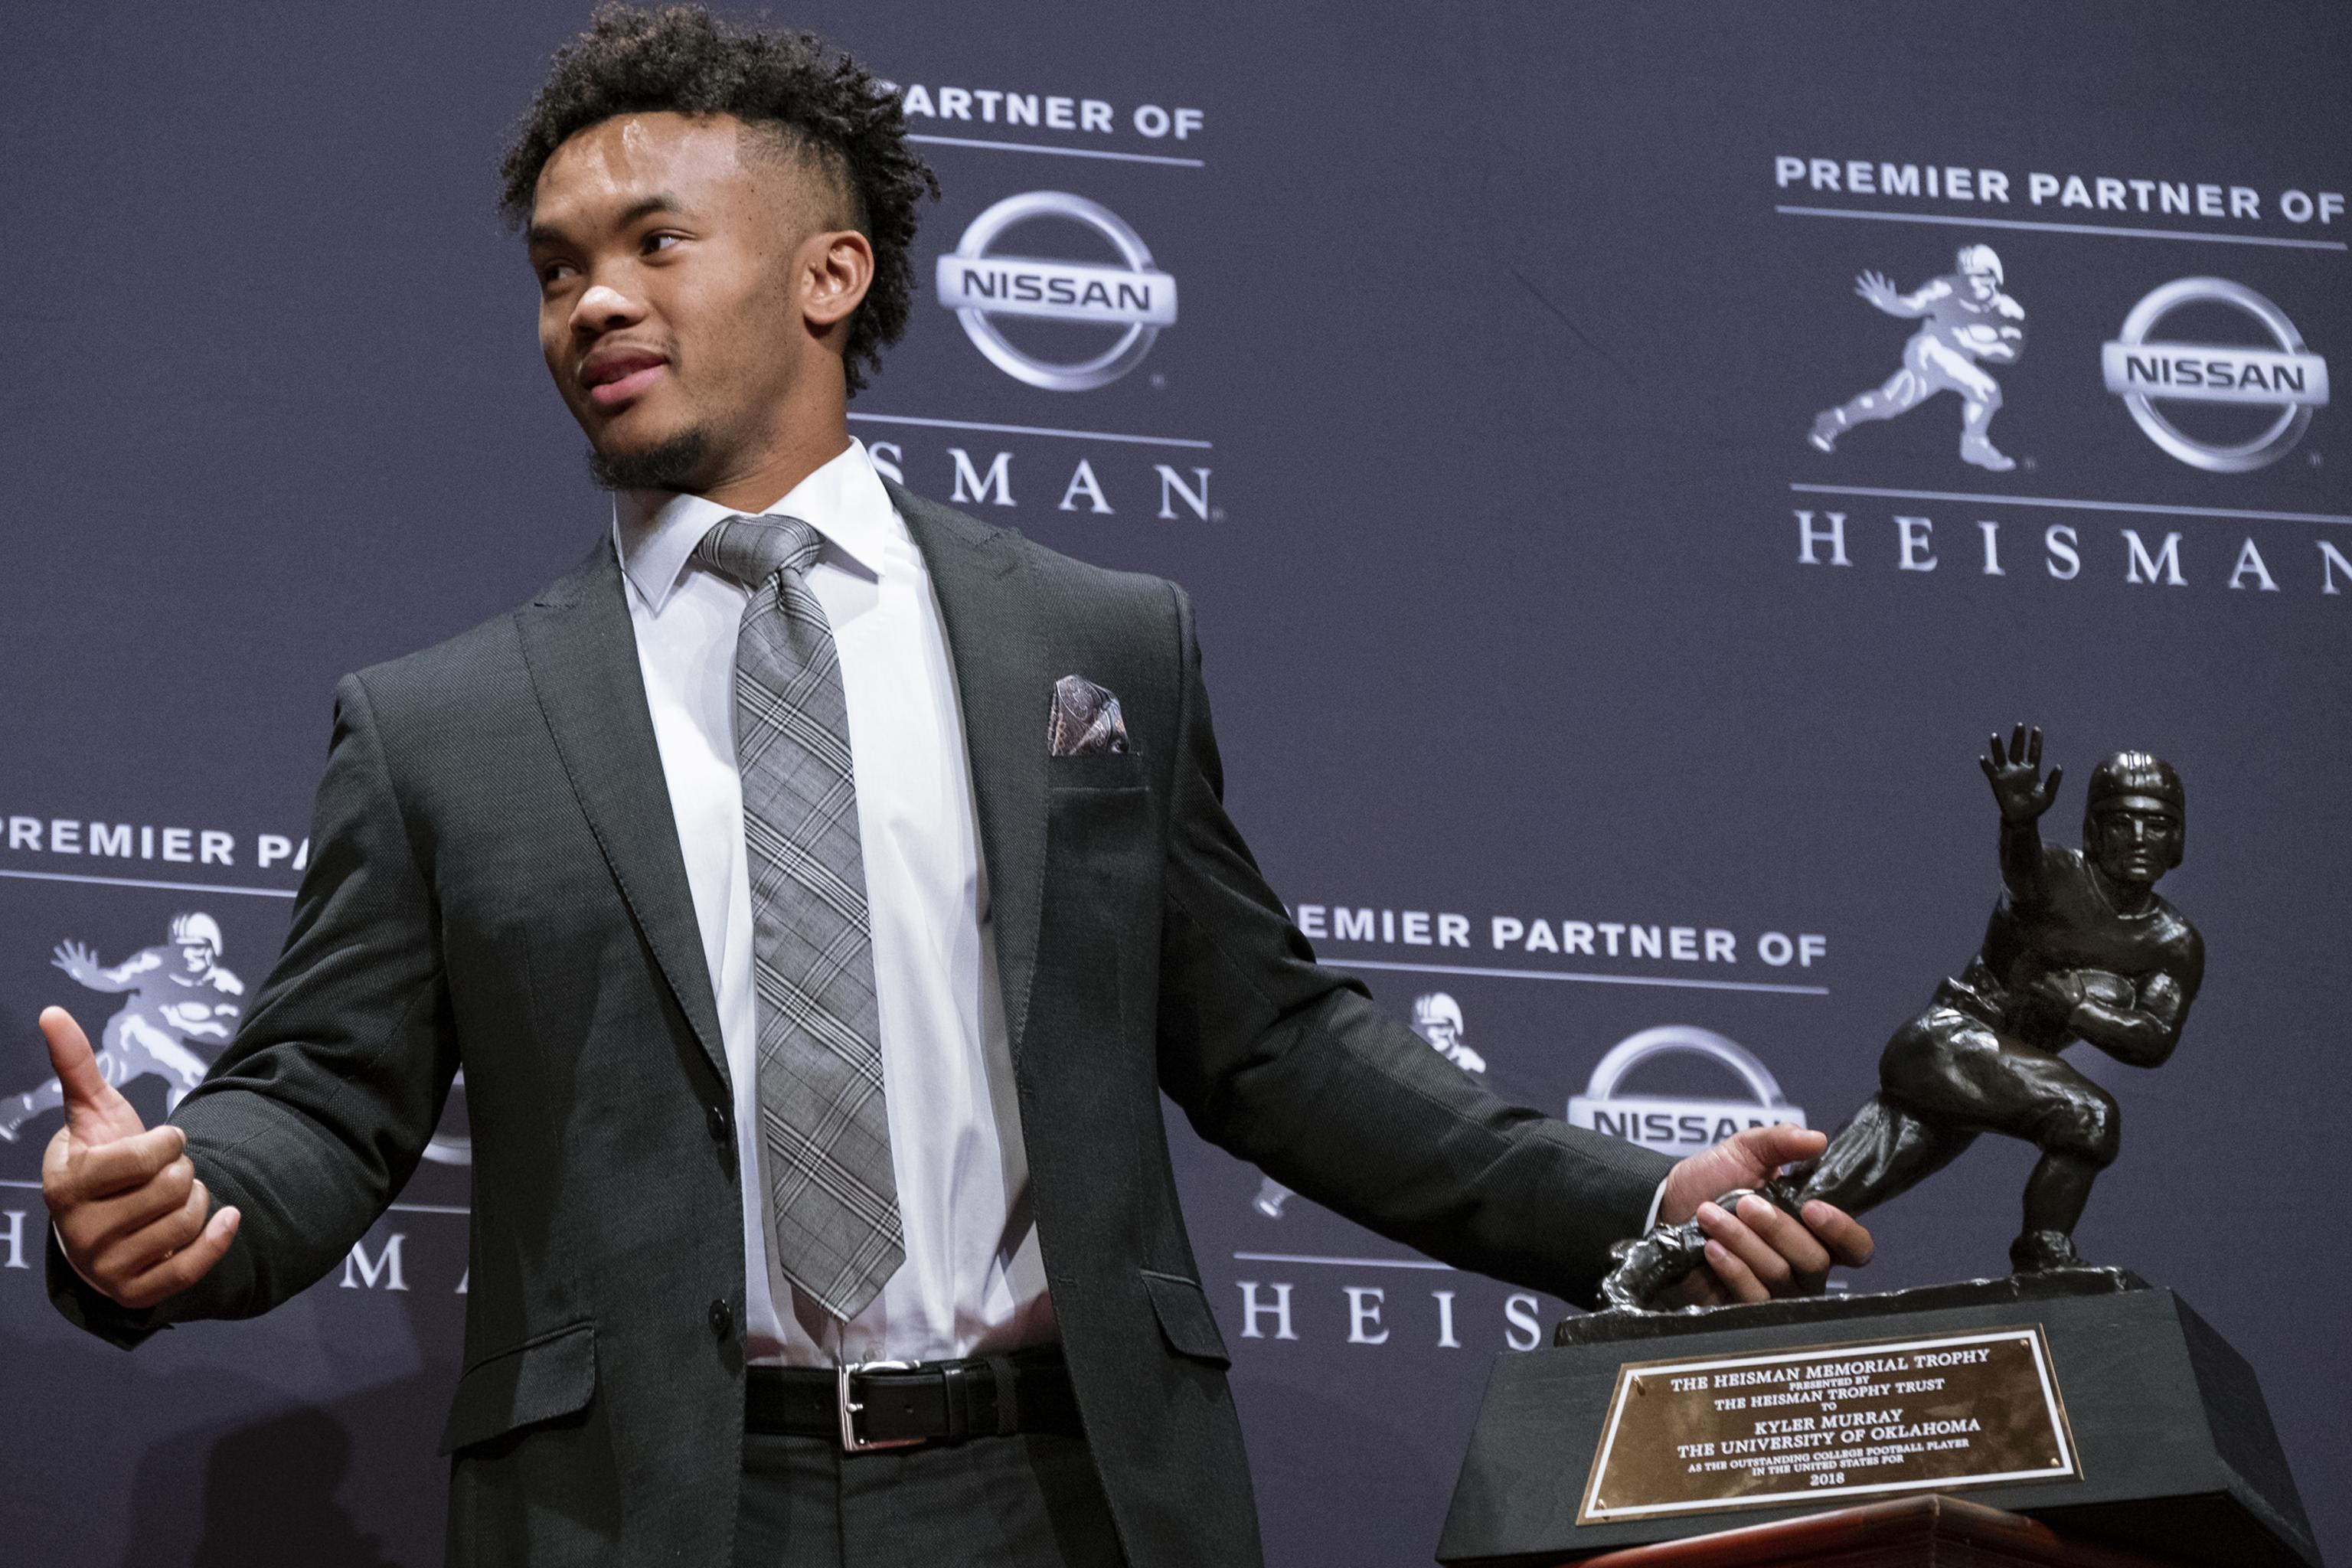 Awaiting decision by Kyler Murray, A's draftee and Heisman Trophy winner